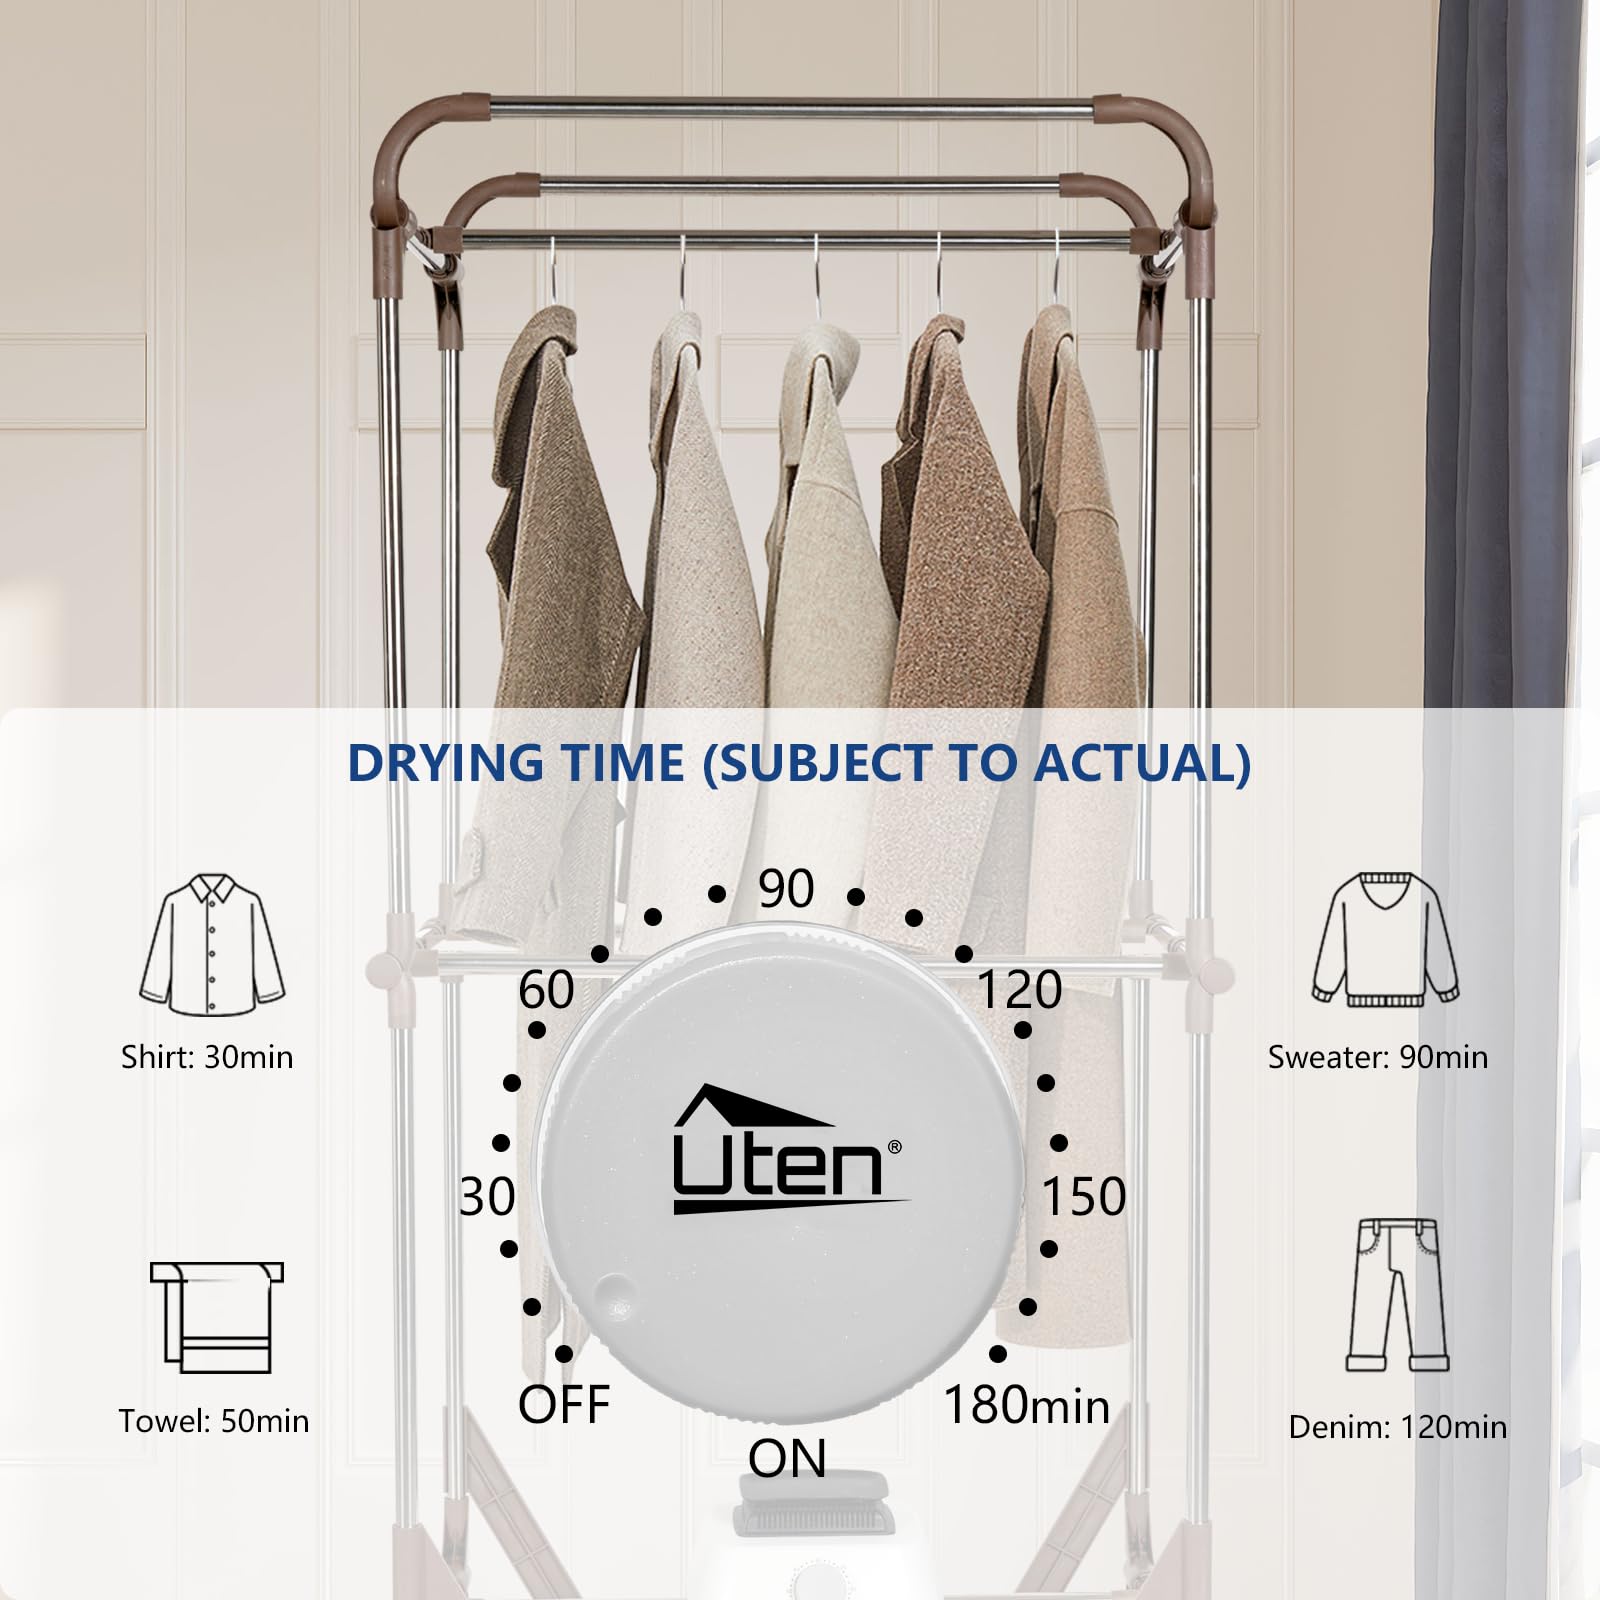 Uten Portable Clothes Dryer, 1500W Power Electric Clothes Dryer Machine with Timer, 2-Tier Portable Laundry Drying Wardrobe, Foldable Clothes Drying Rack and Dryer for Travel, Apartments, RV, Home